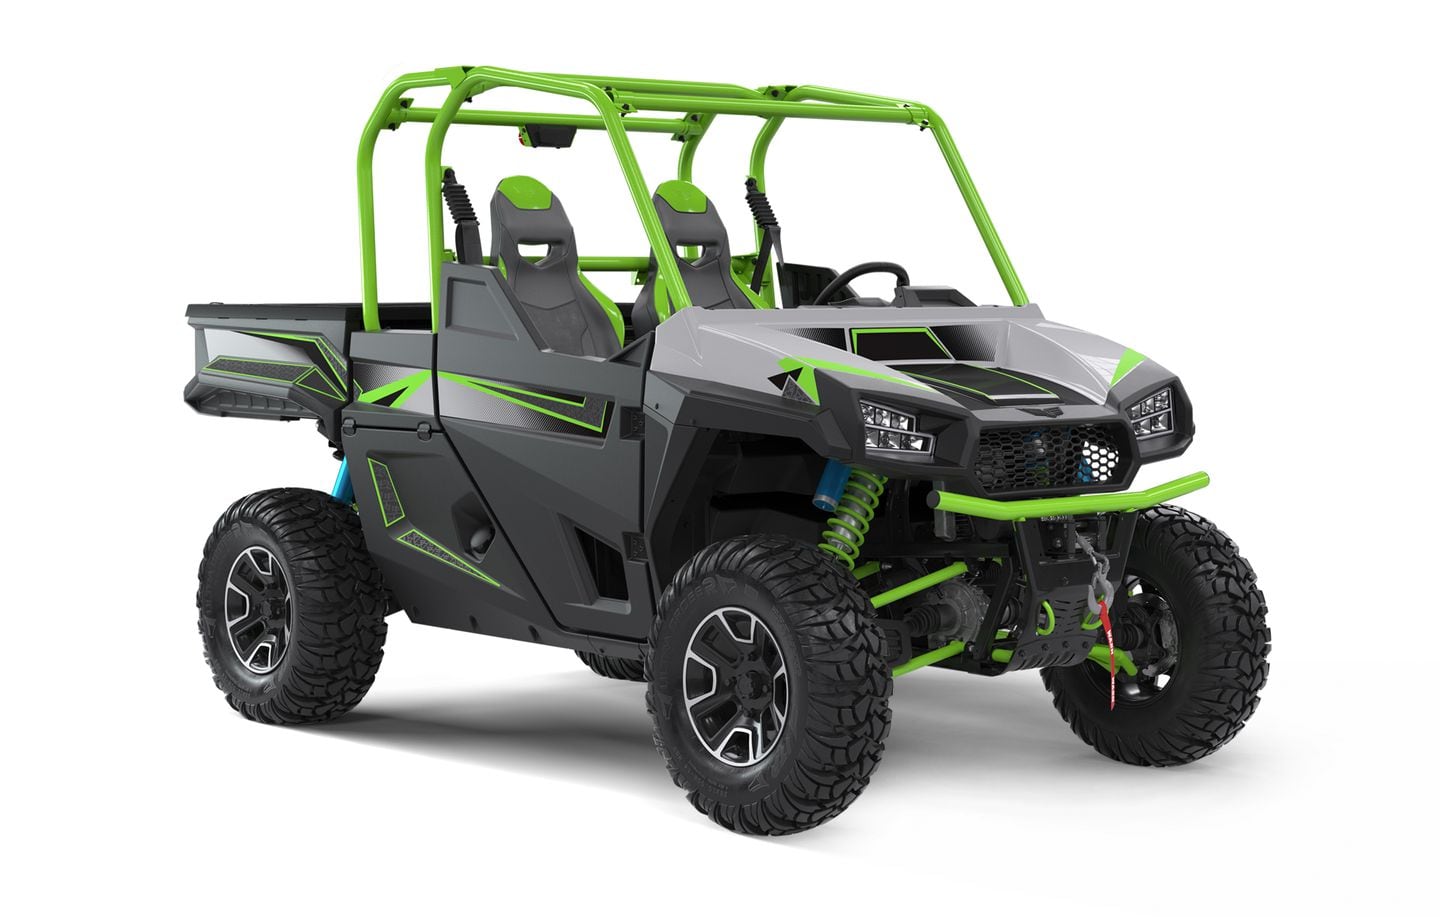 Arctic Cat brand name changed to Textron Off Road for SidebySides and